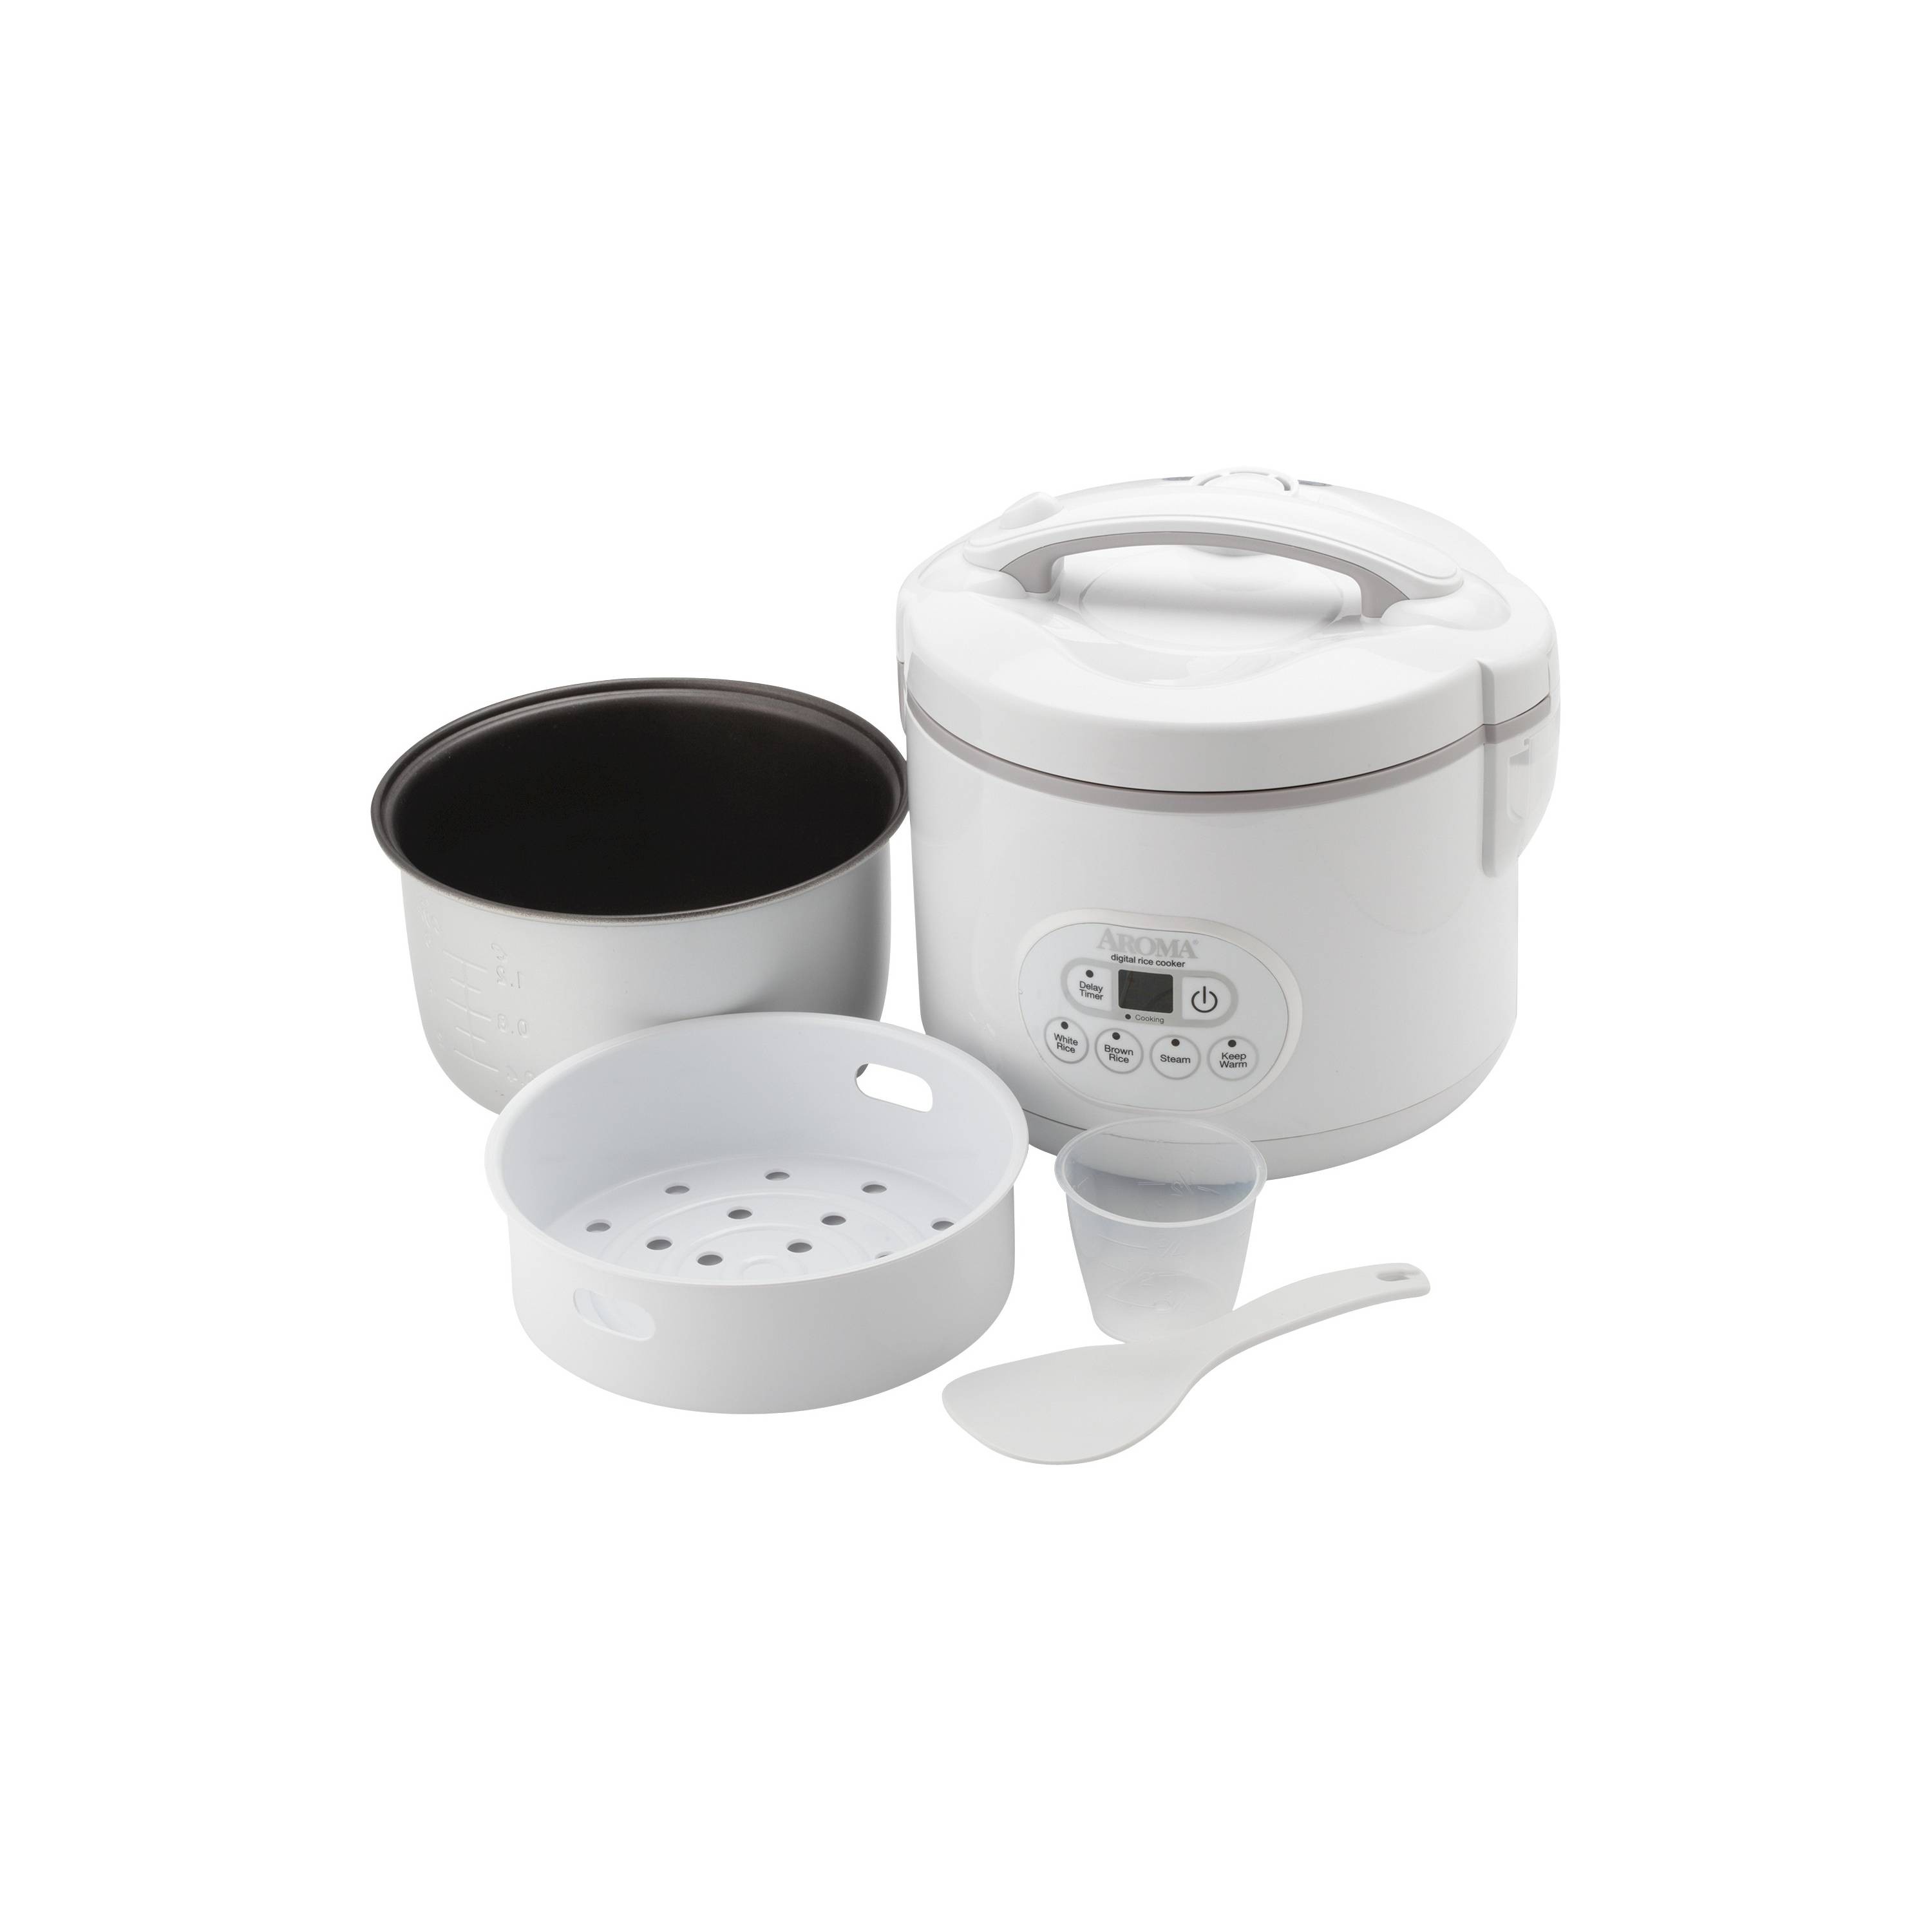 Aroma CRC-926D Rice Cooker/ Food Steamer